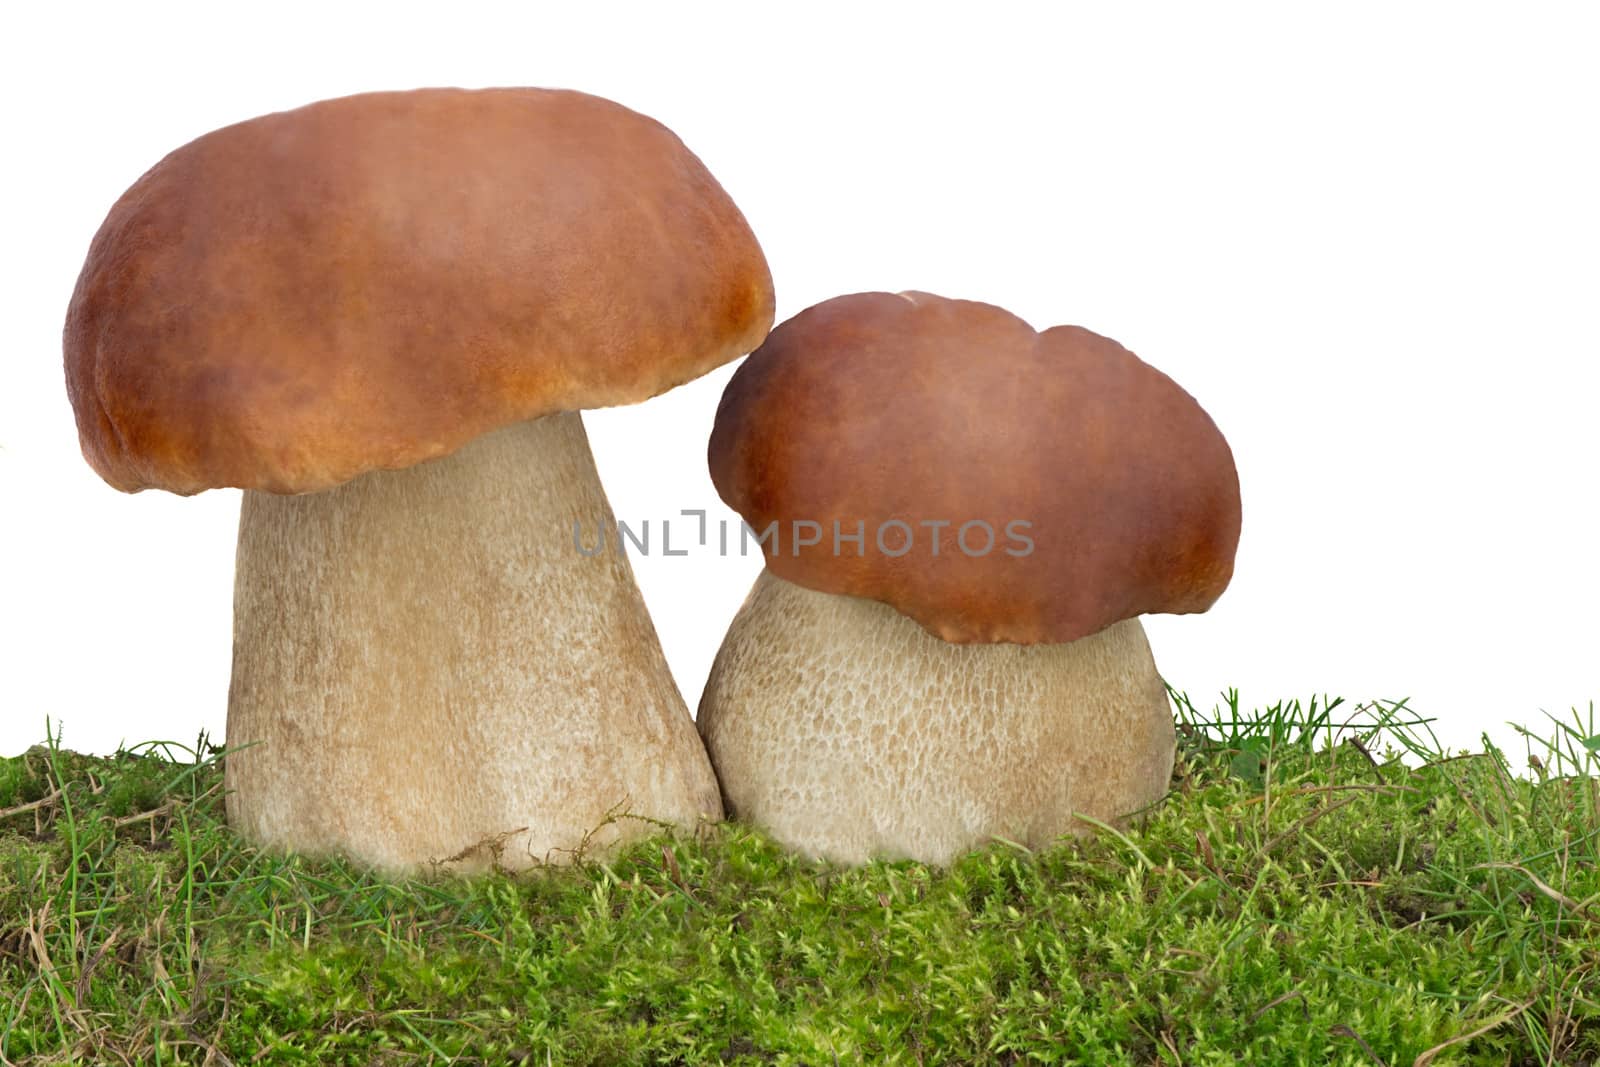 Two big beautiful white fungus on the green grass. Presented on a white background